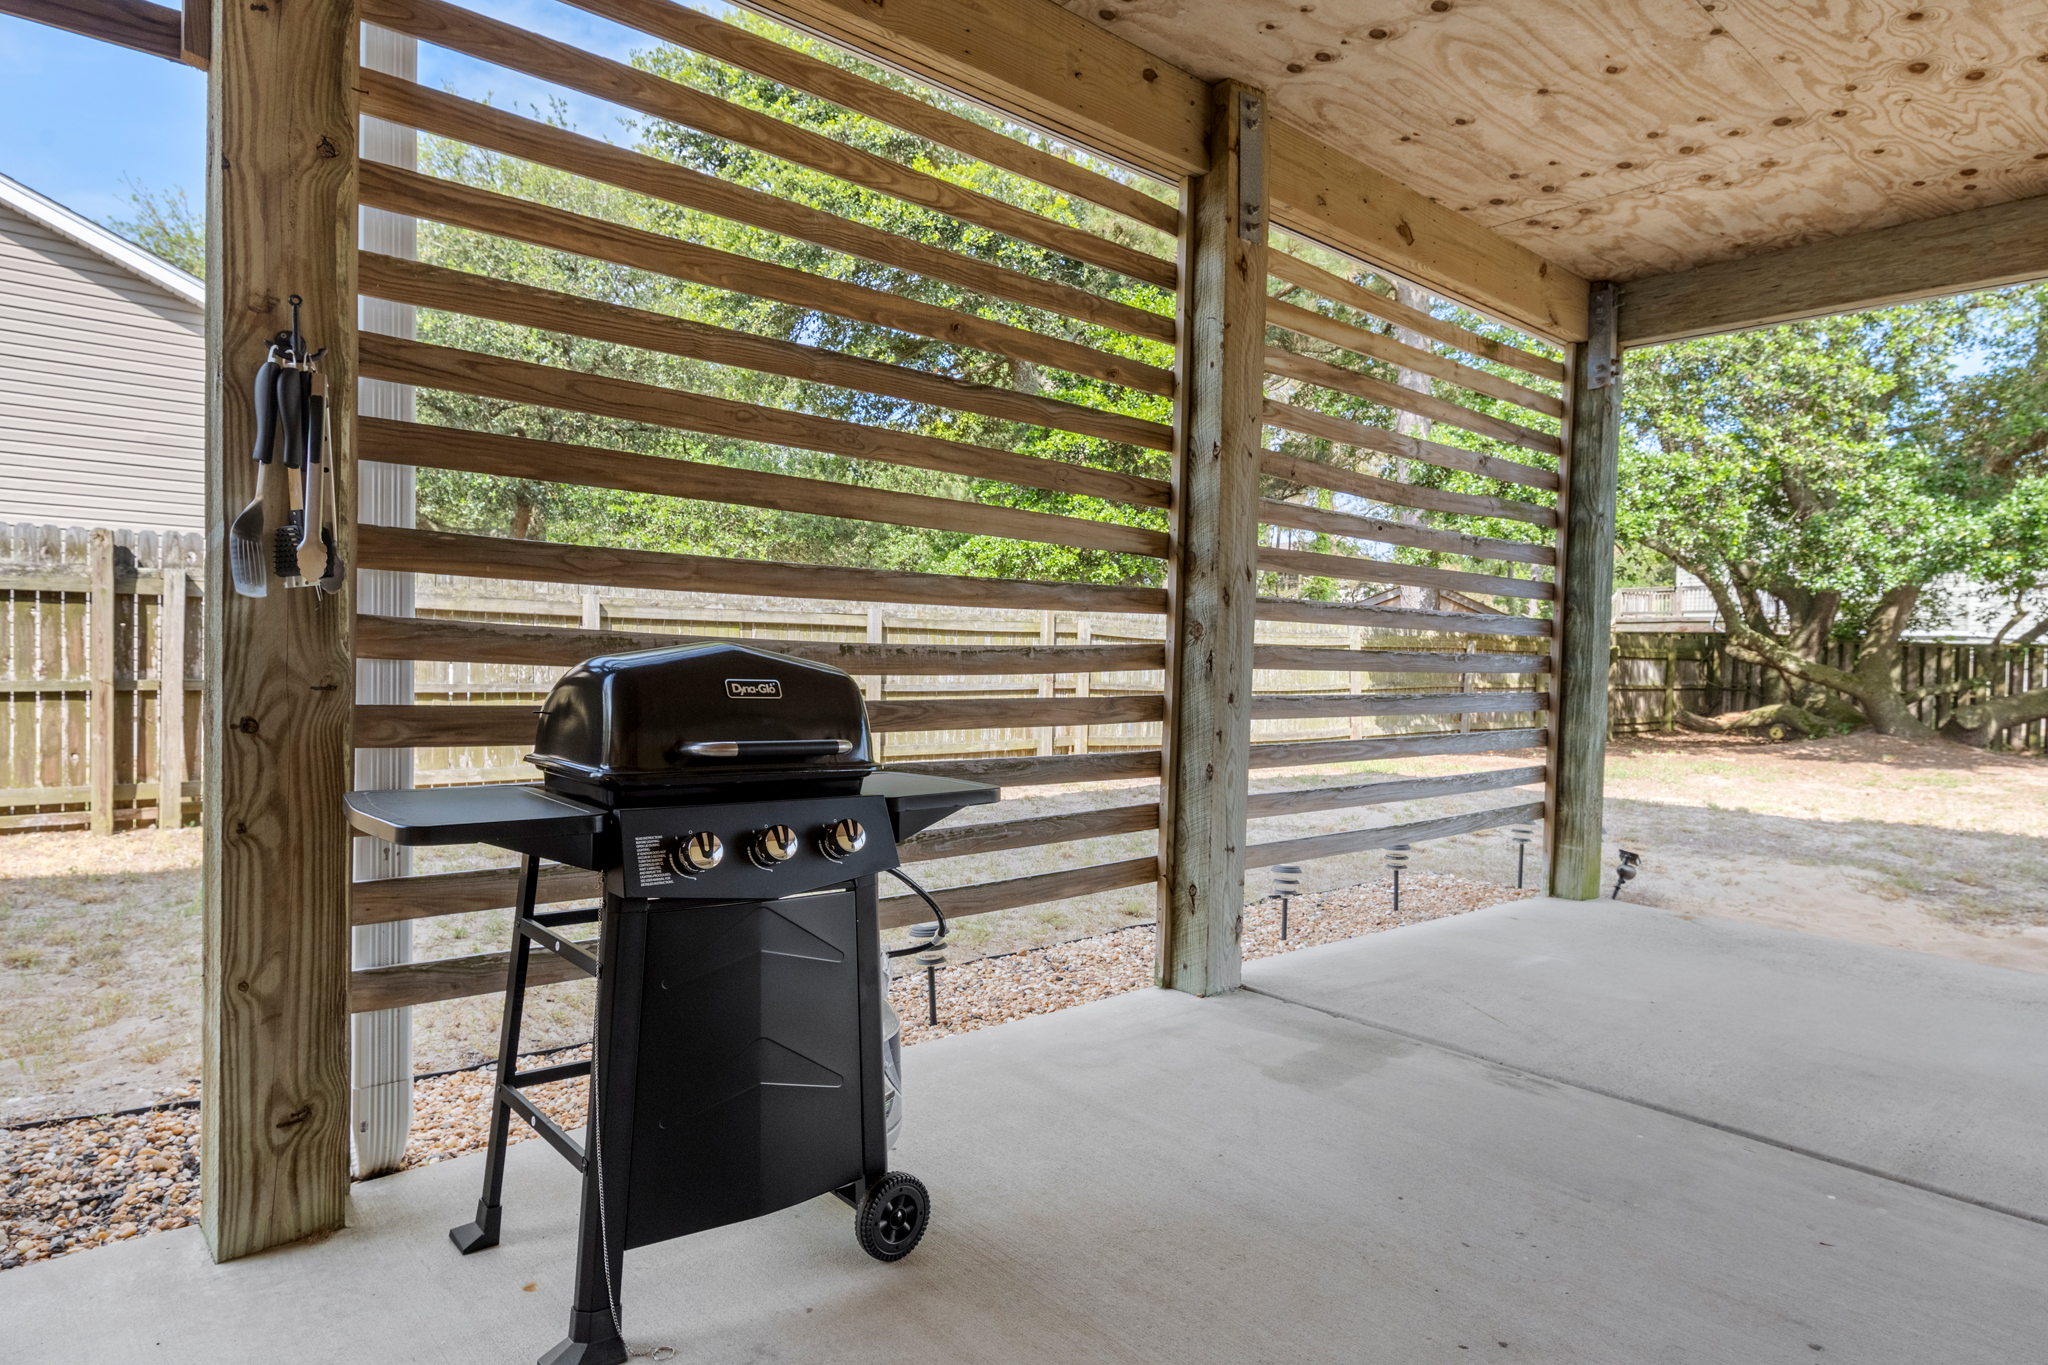 KDS88: Barnacles | Carport w/ Grilling Area